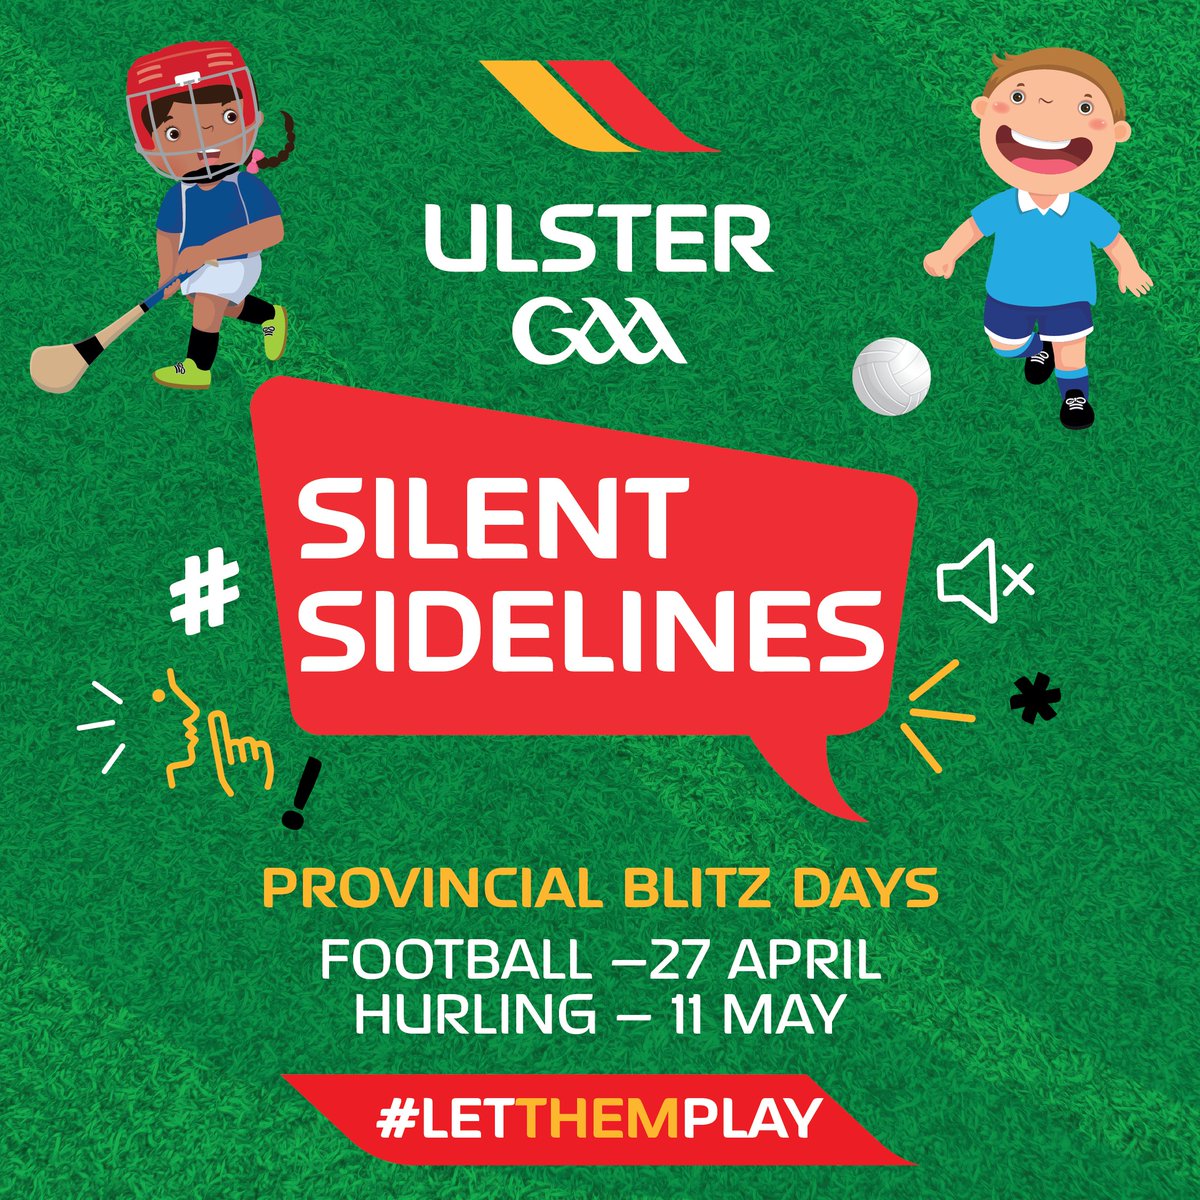 Ulster GAA is advising all our units to organise their Go Games with Silent Sidelines 🤫 This weekend it's the turn of football, with a day of blitzes at Under9.5/Under10.5 grades organised across the province on Saturday🏐 Visit ulster.gaa.ie/silentsidelines #LetThemPlay